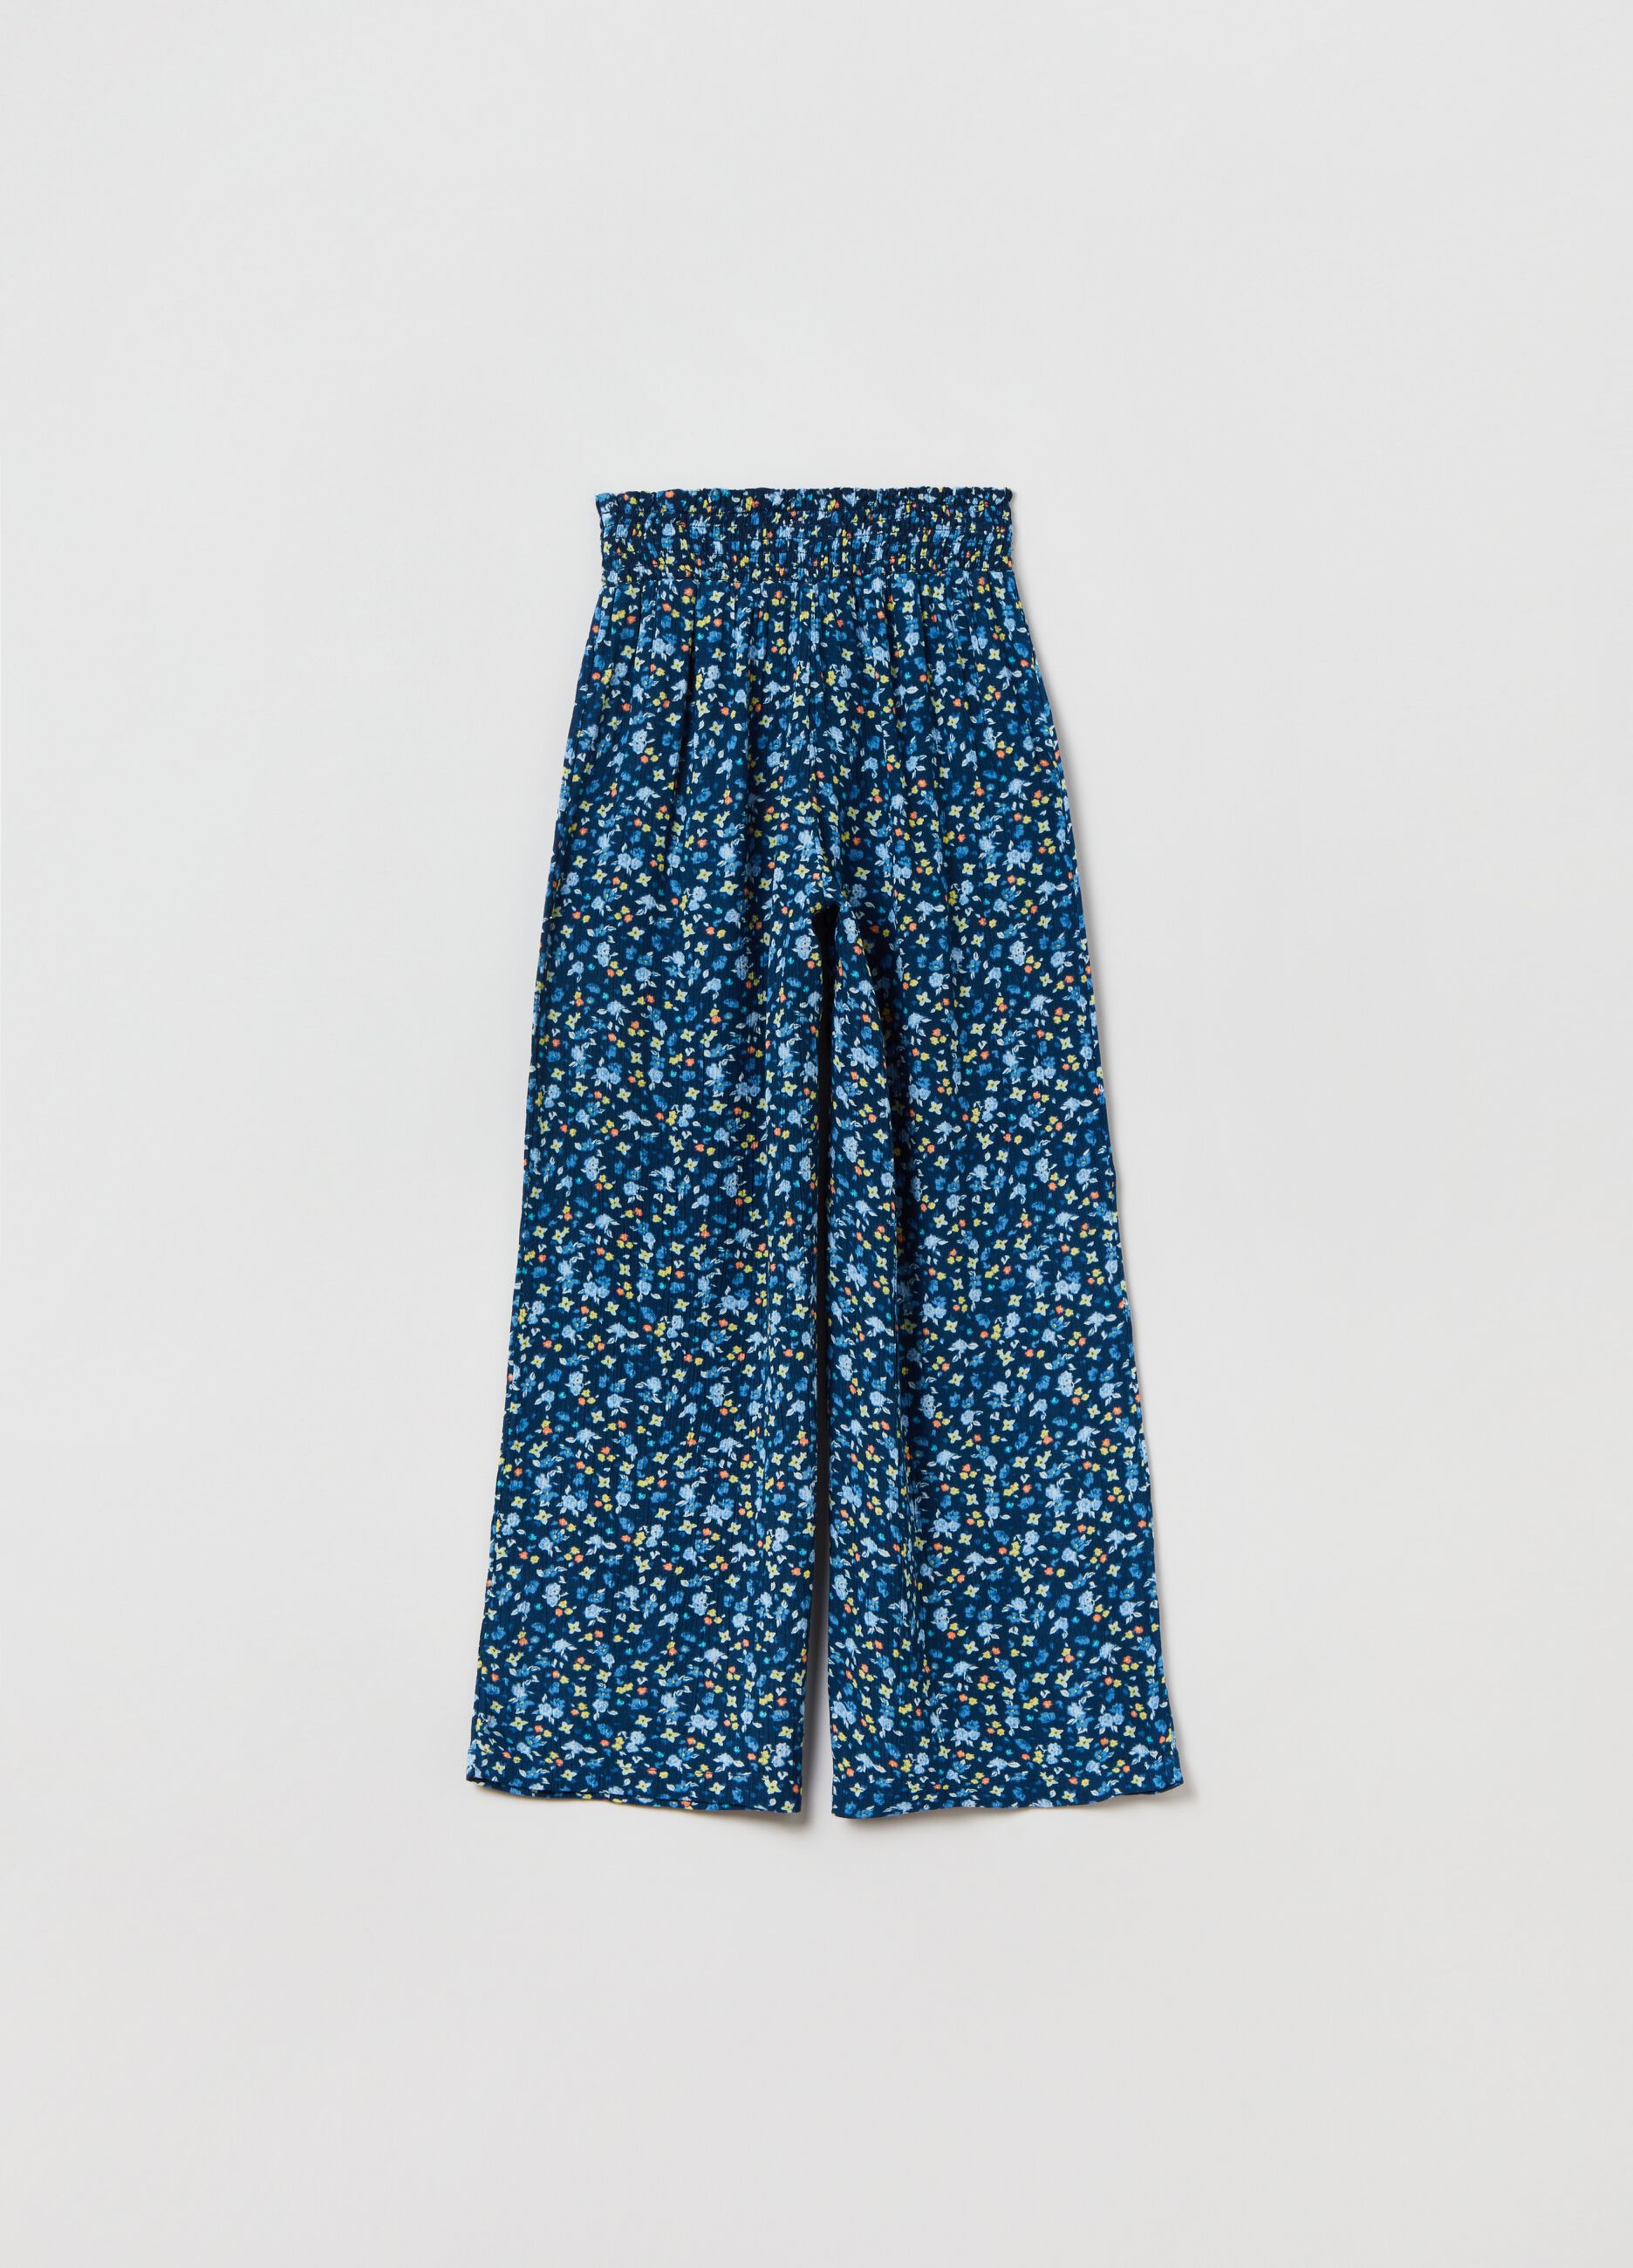 Viscose trousers with small flowers print